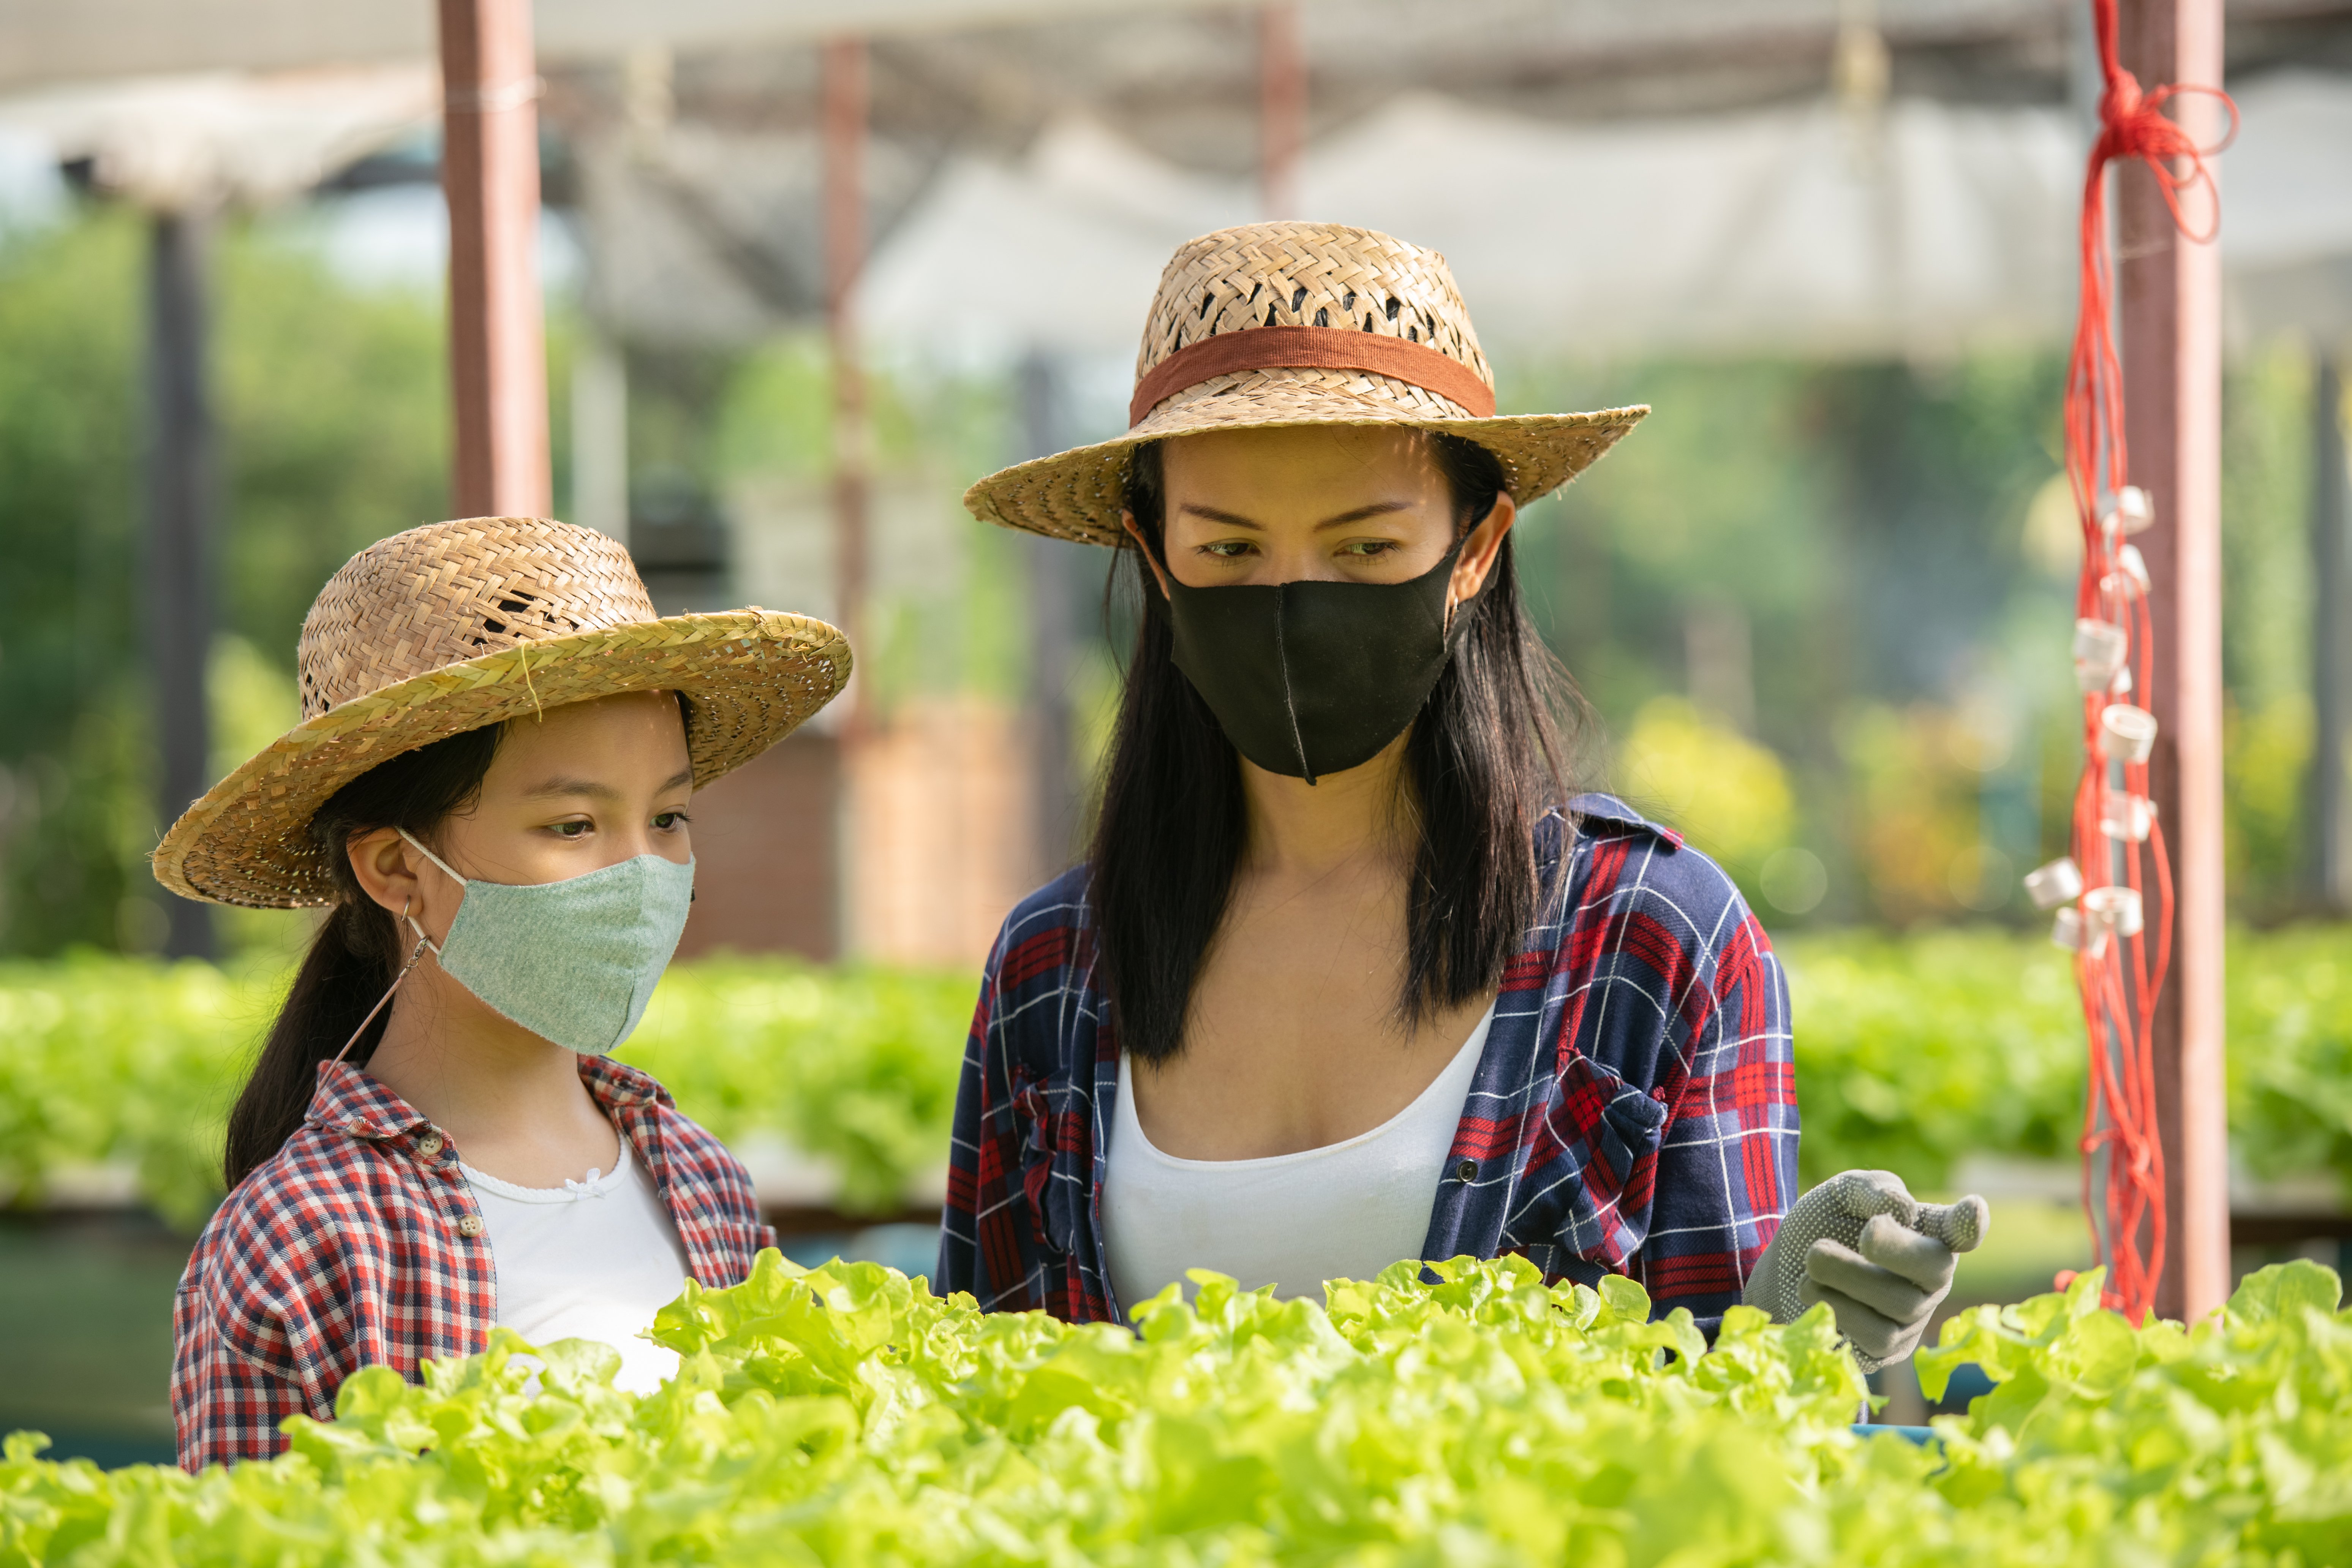 asian-mother-daughter-wear-mask-are-helping-together-collect-fresh-hydroponic-vegetable-farm-concept-gardening-kid-education-household-agricultural-family-life-style